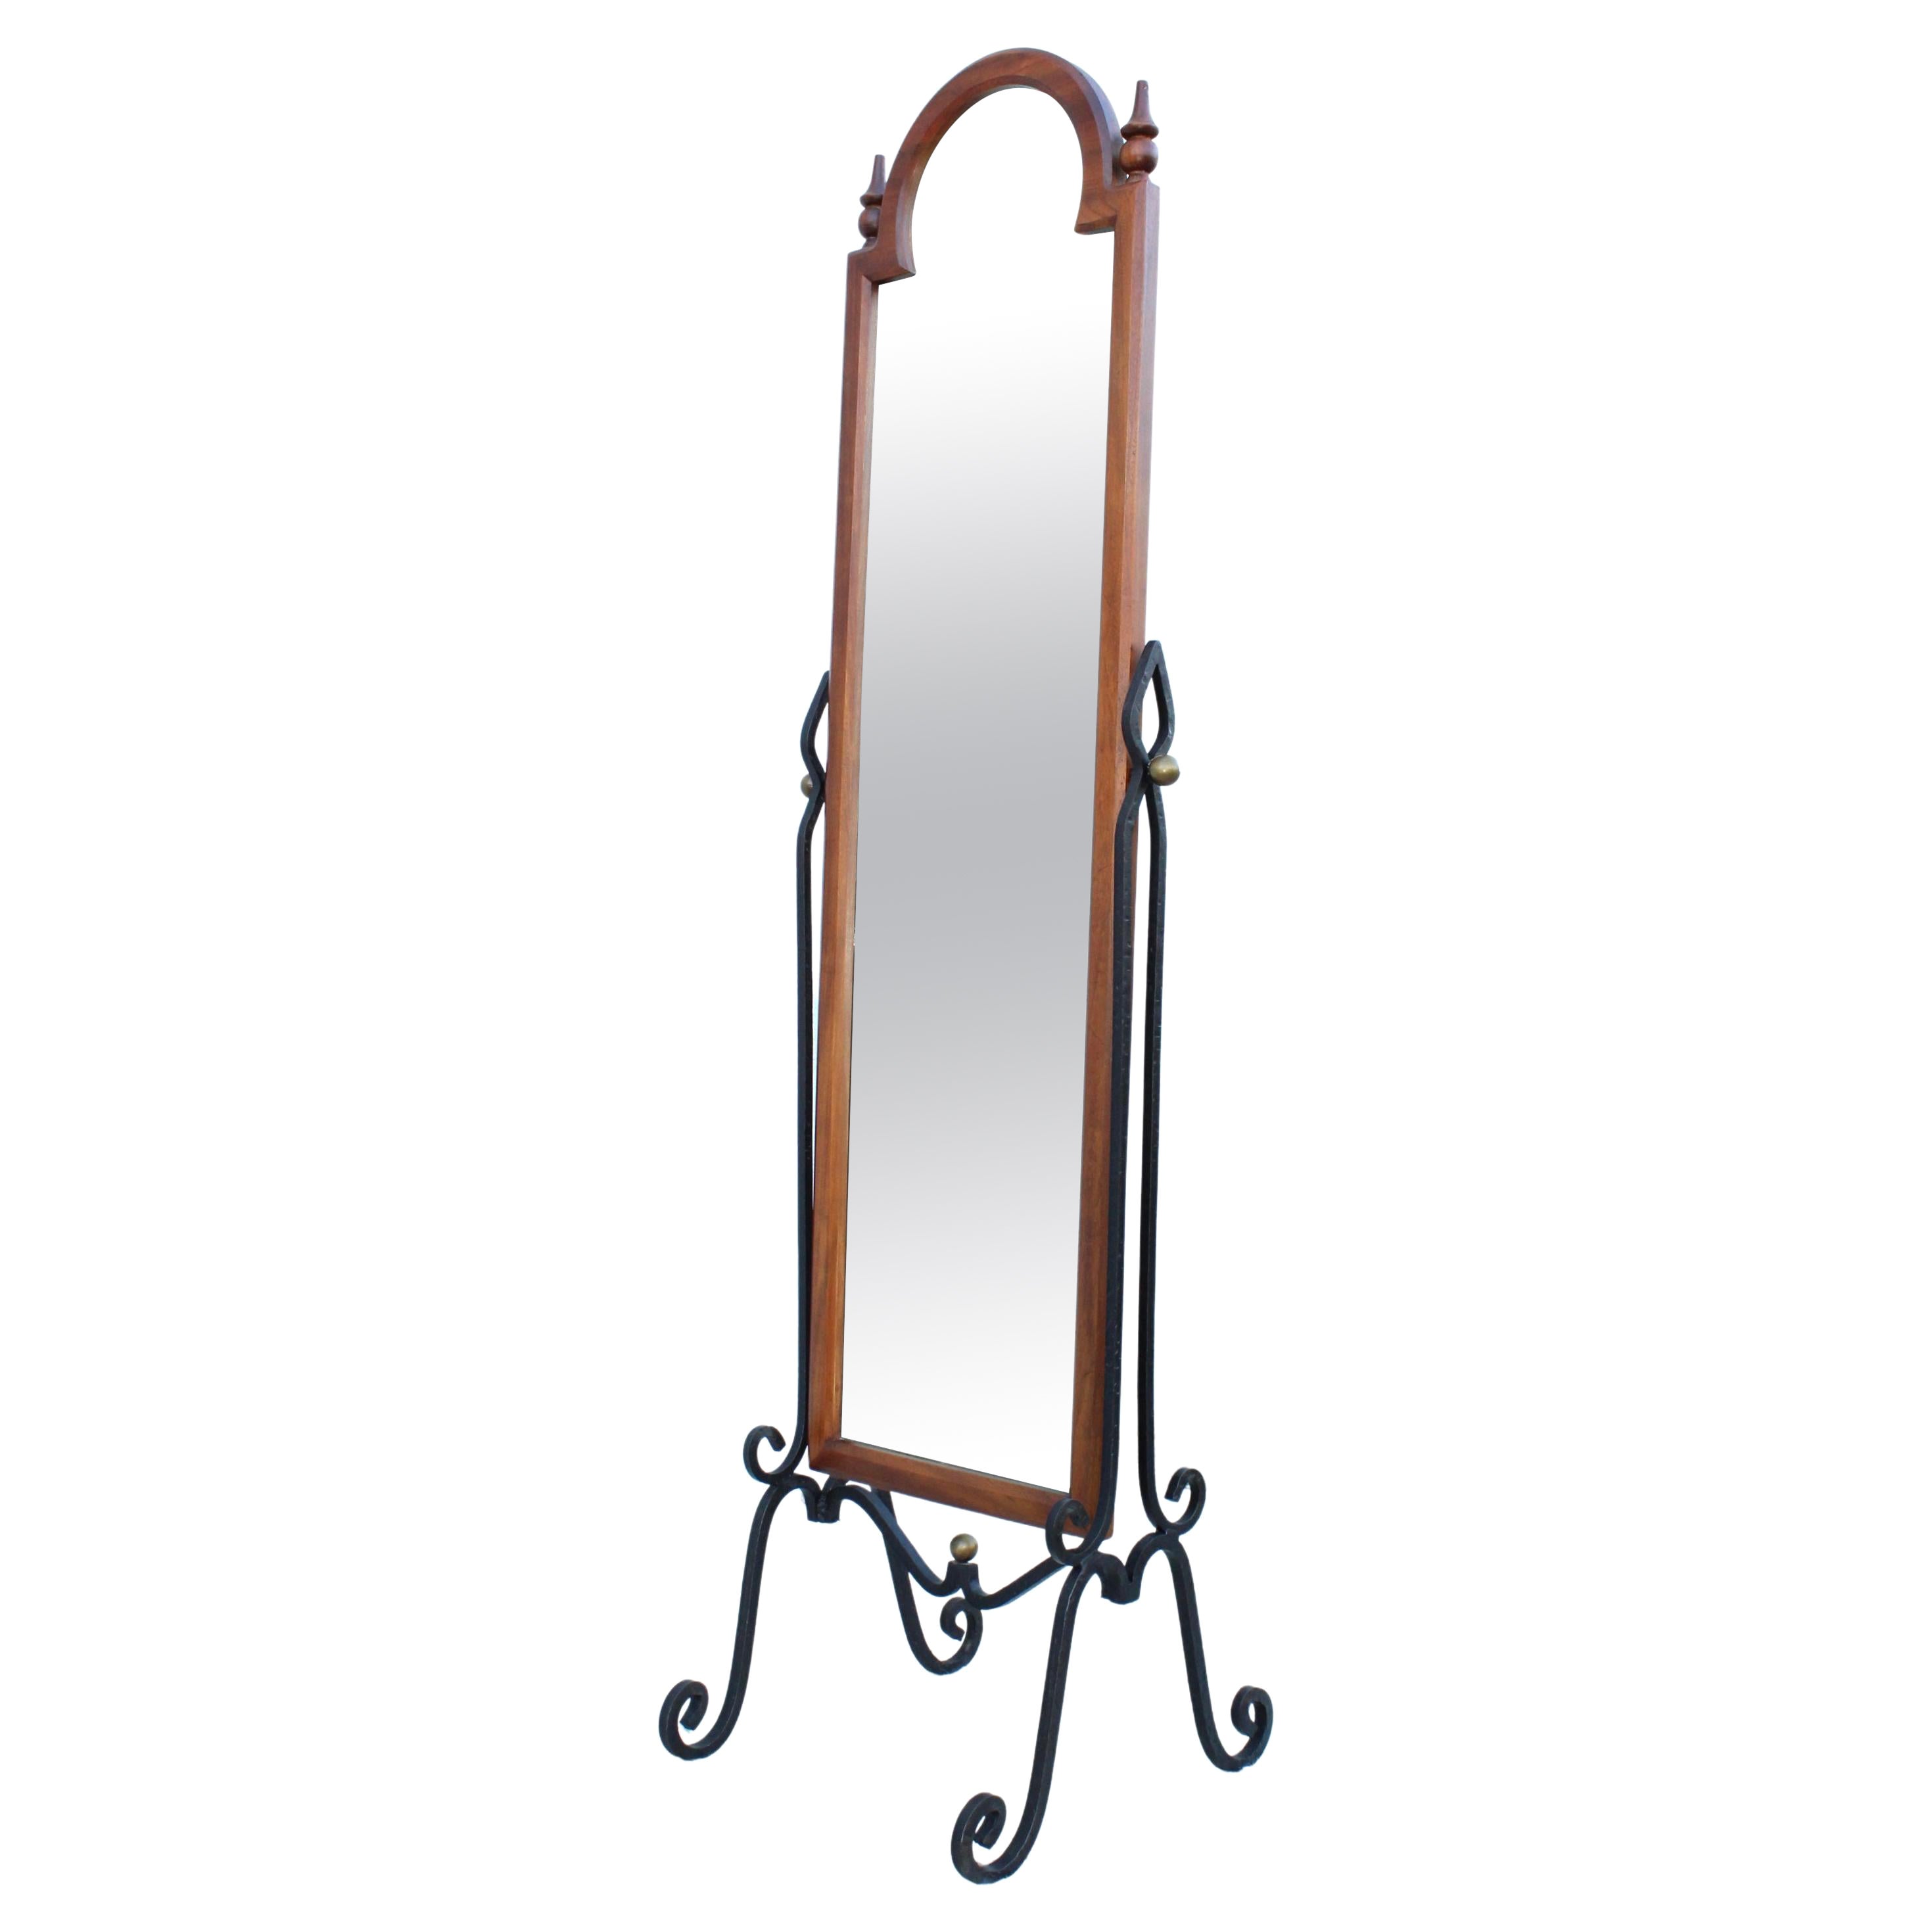 1960's Fruit-Wood and Scrolled Iron Cheval Mirror